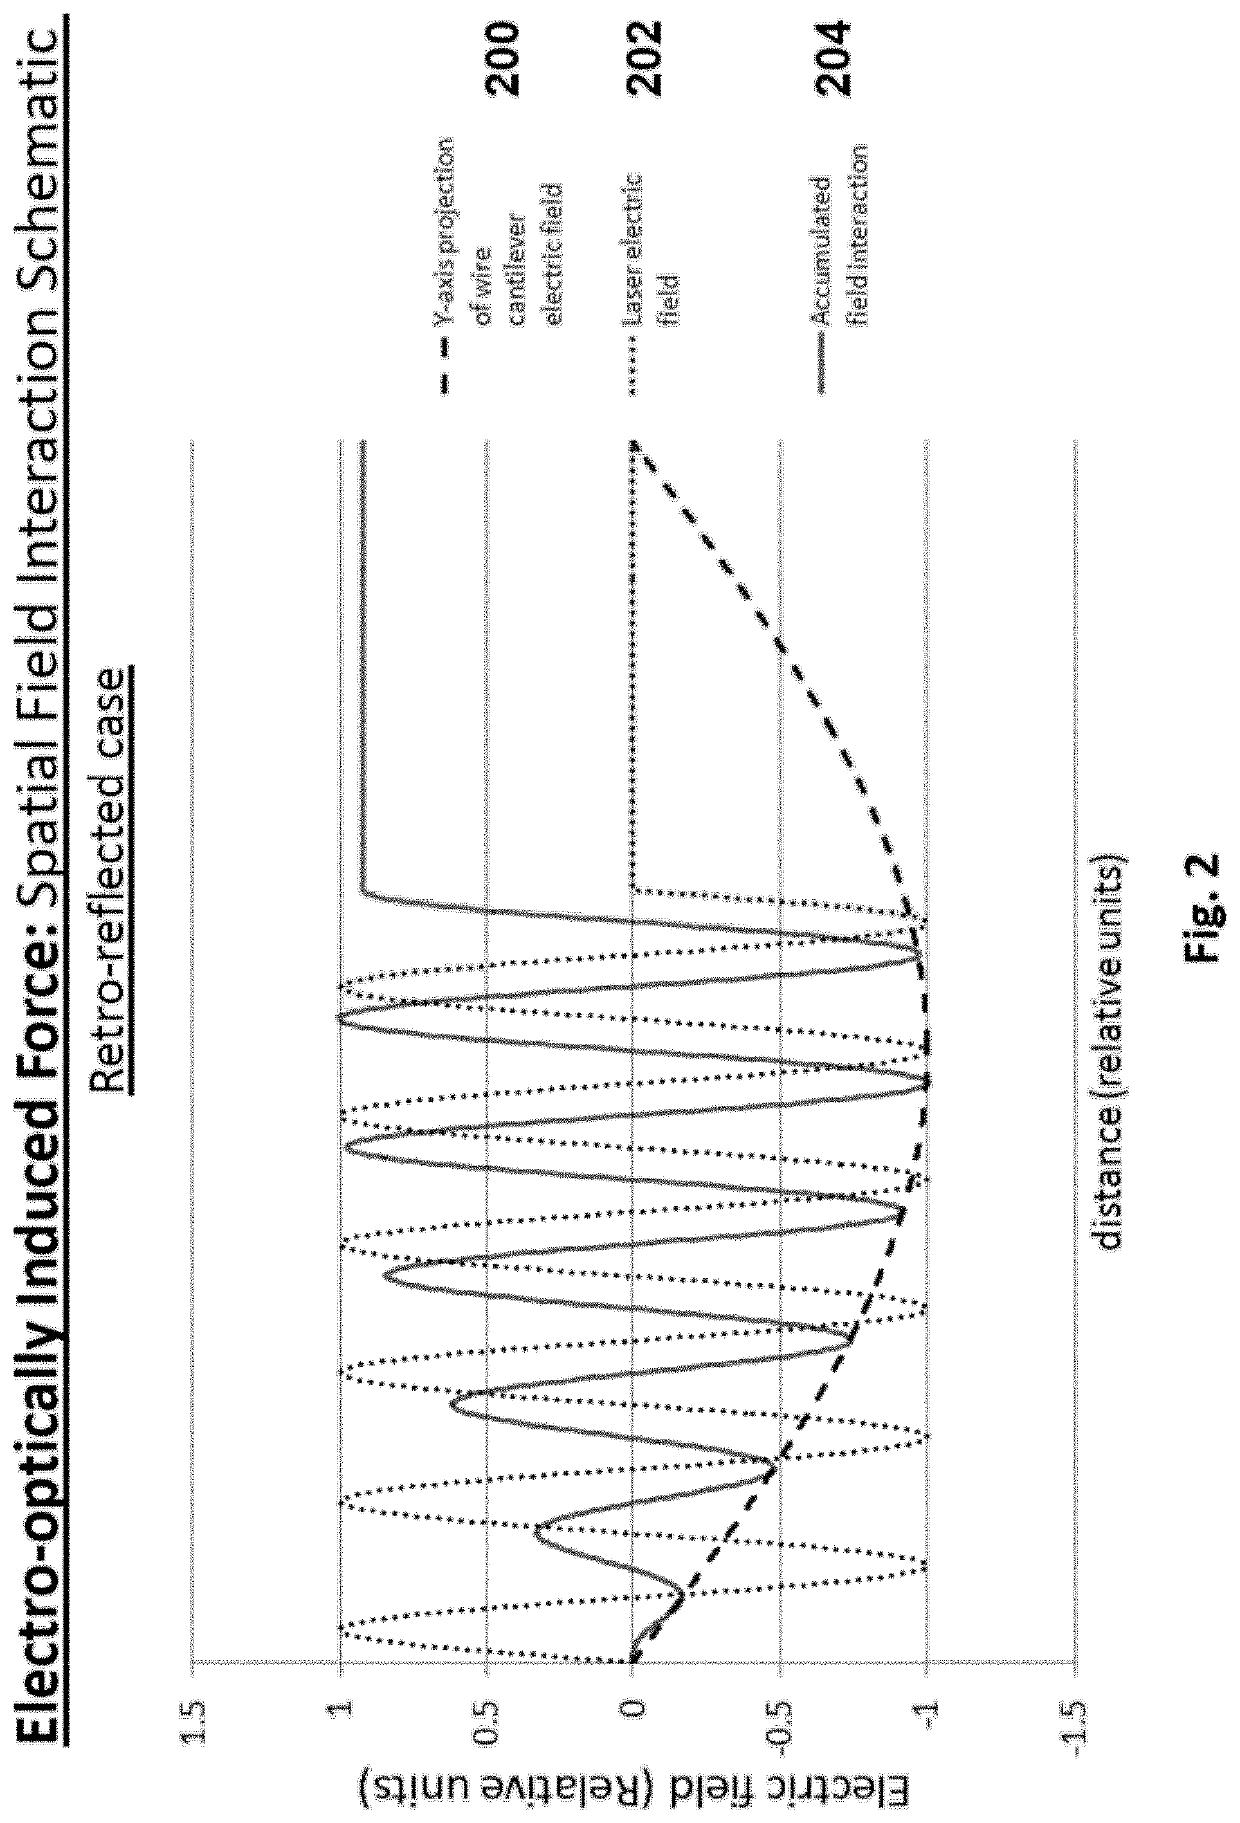 Scalable, electro-optically induced force system and method